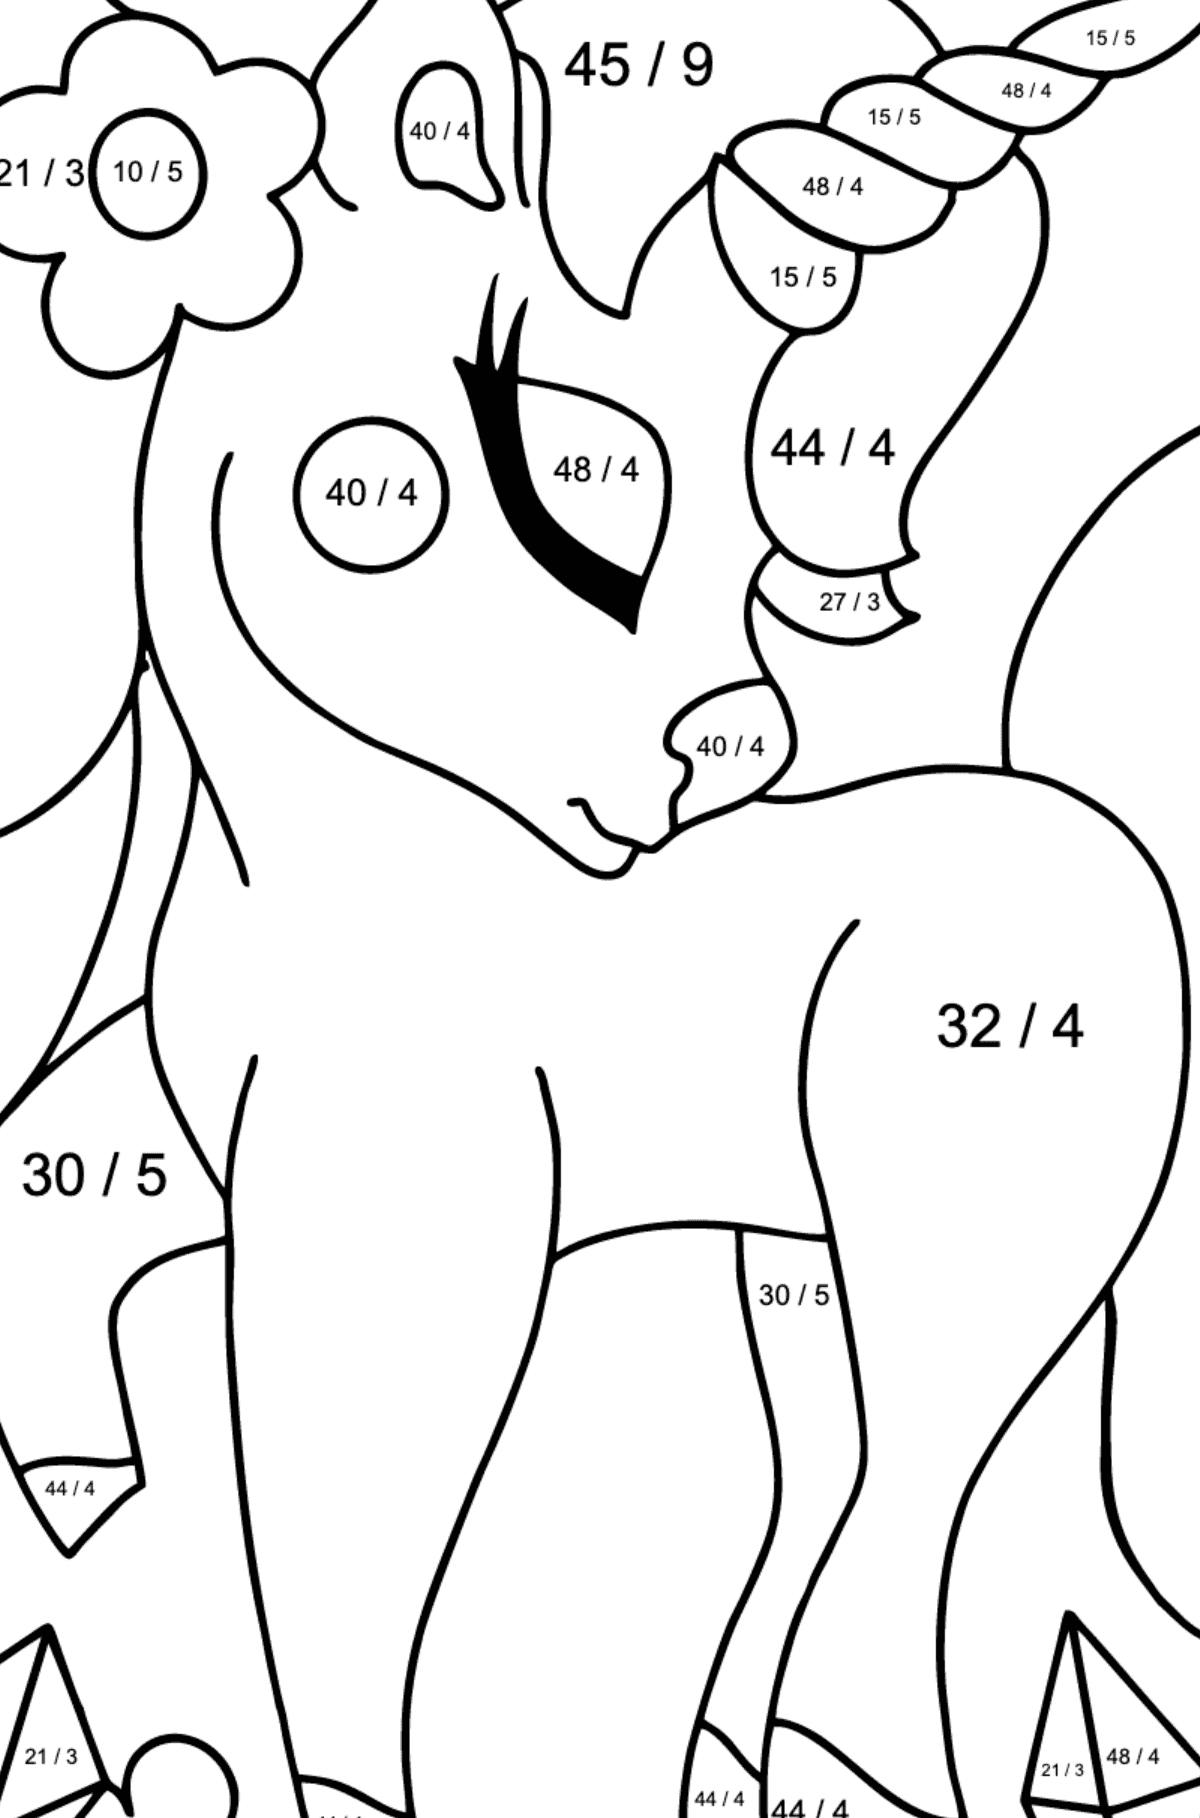 Charming Unicorn Coloring Page - Math Coloring - Division for Kids